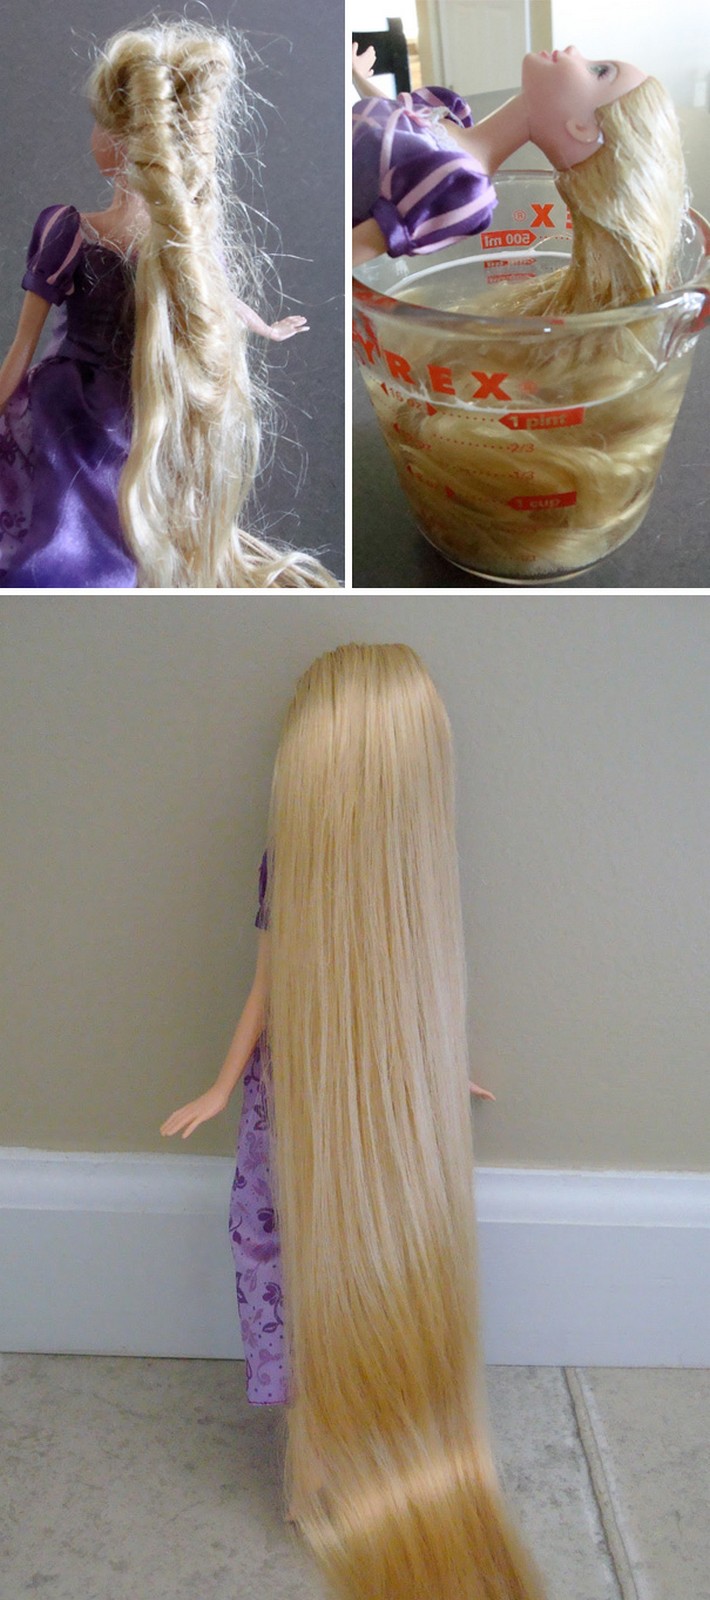 21 Best Mom Hacks - Detangle doll's hair with hot water, shampoo, and conditioner.